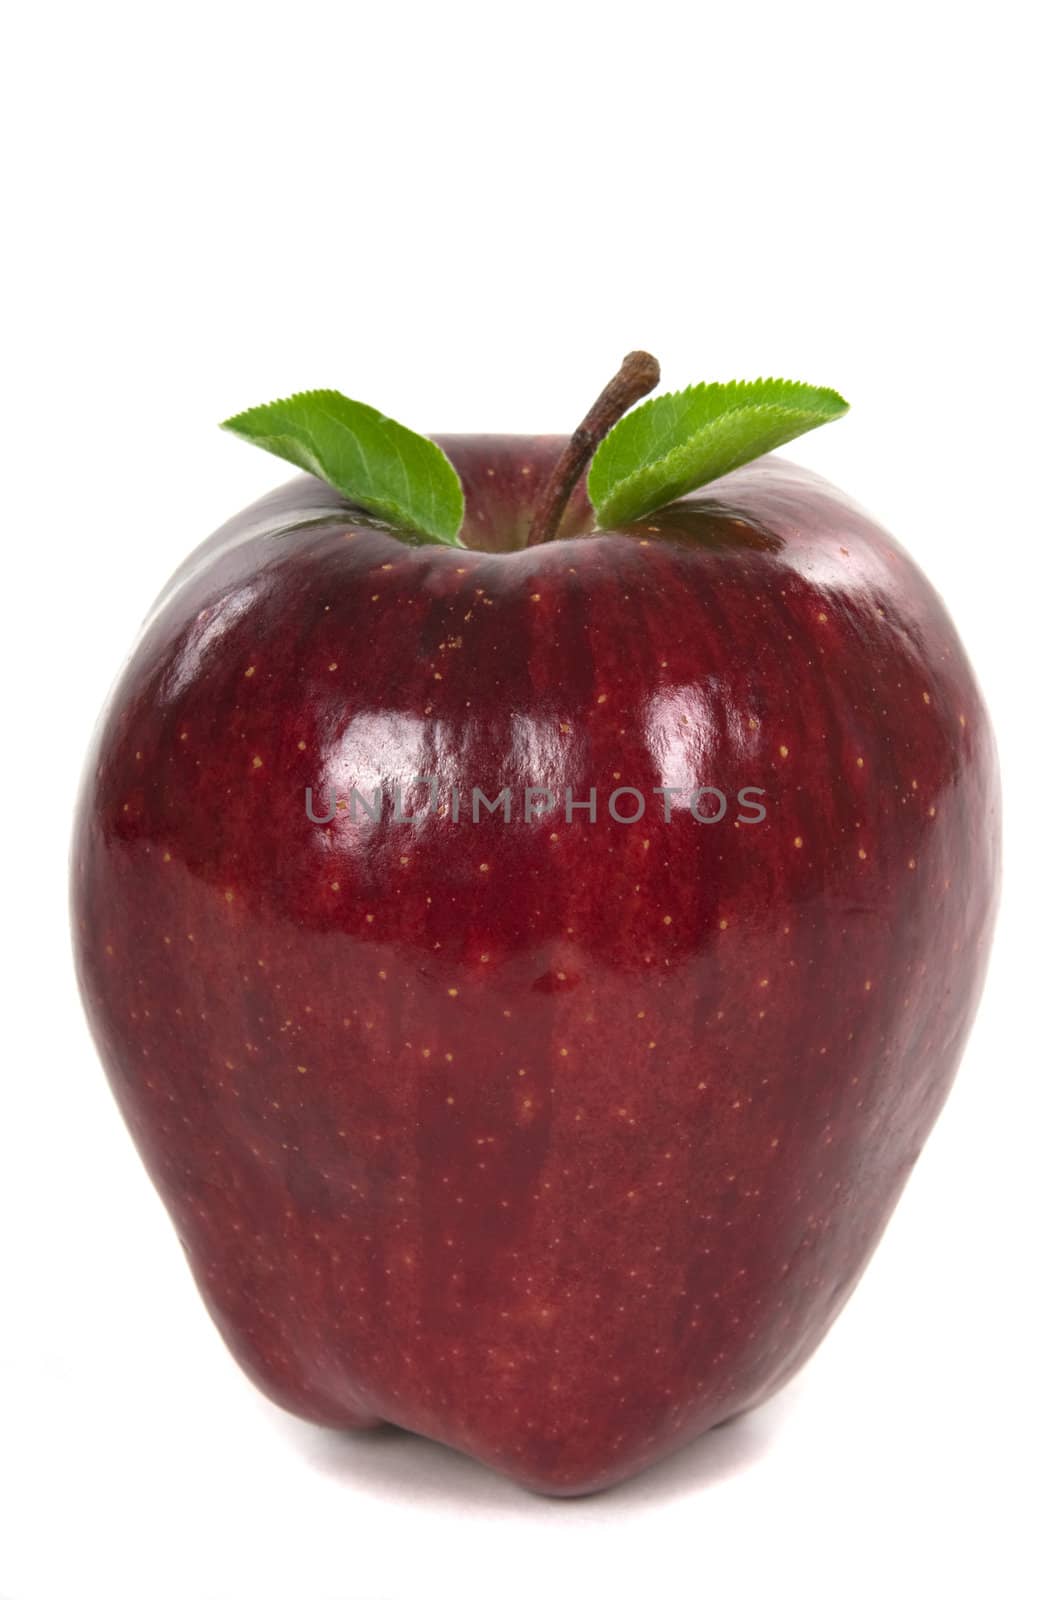 Organic red apple with leaves